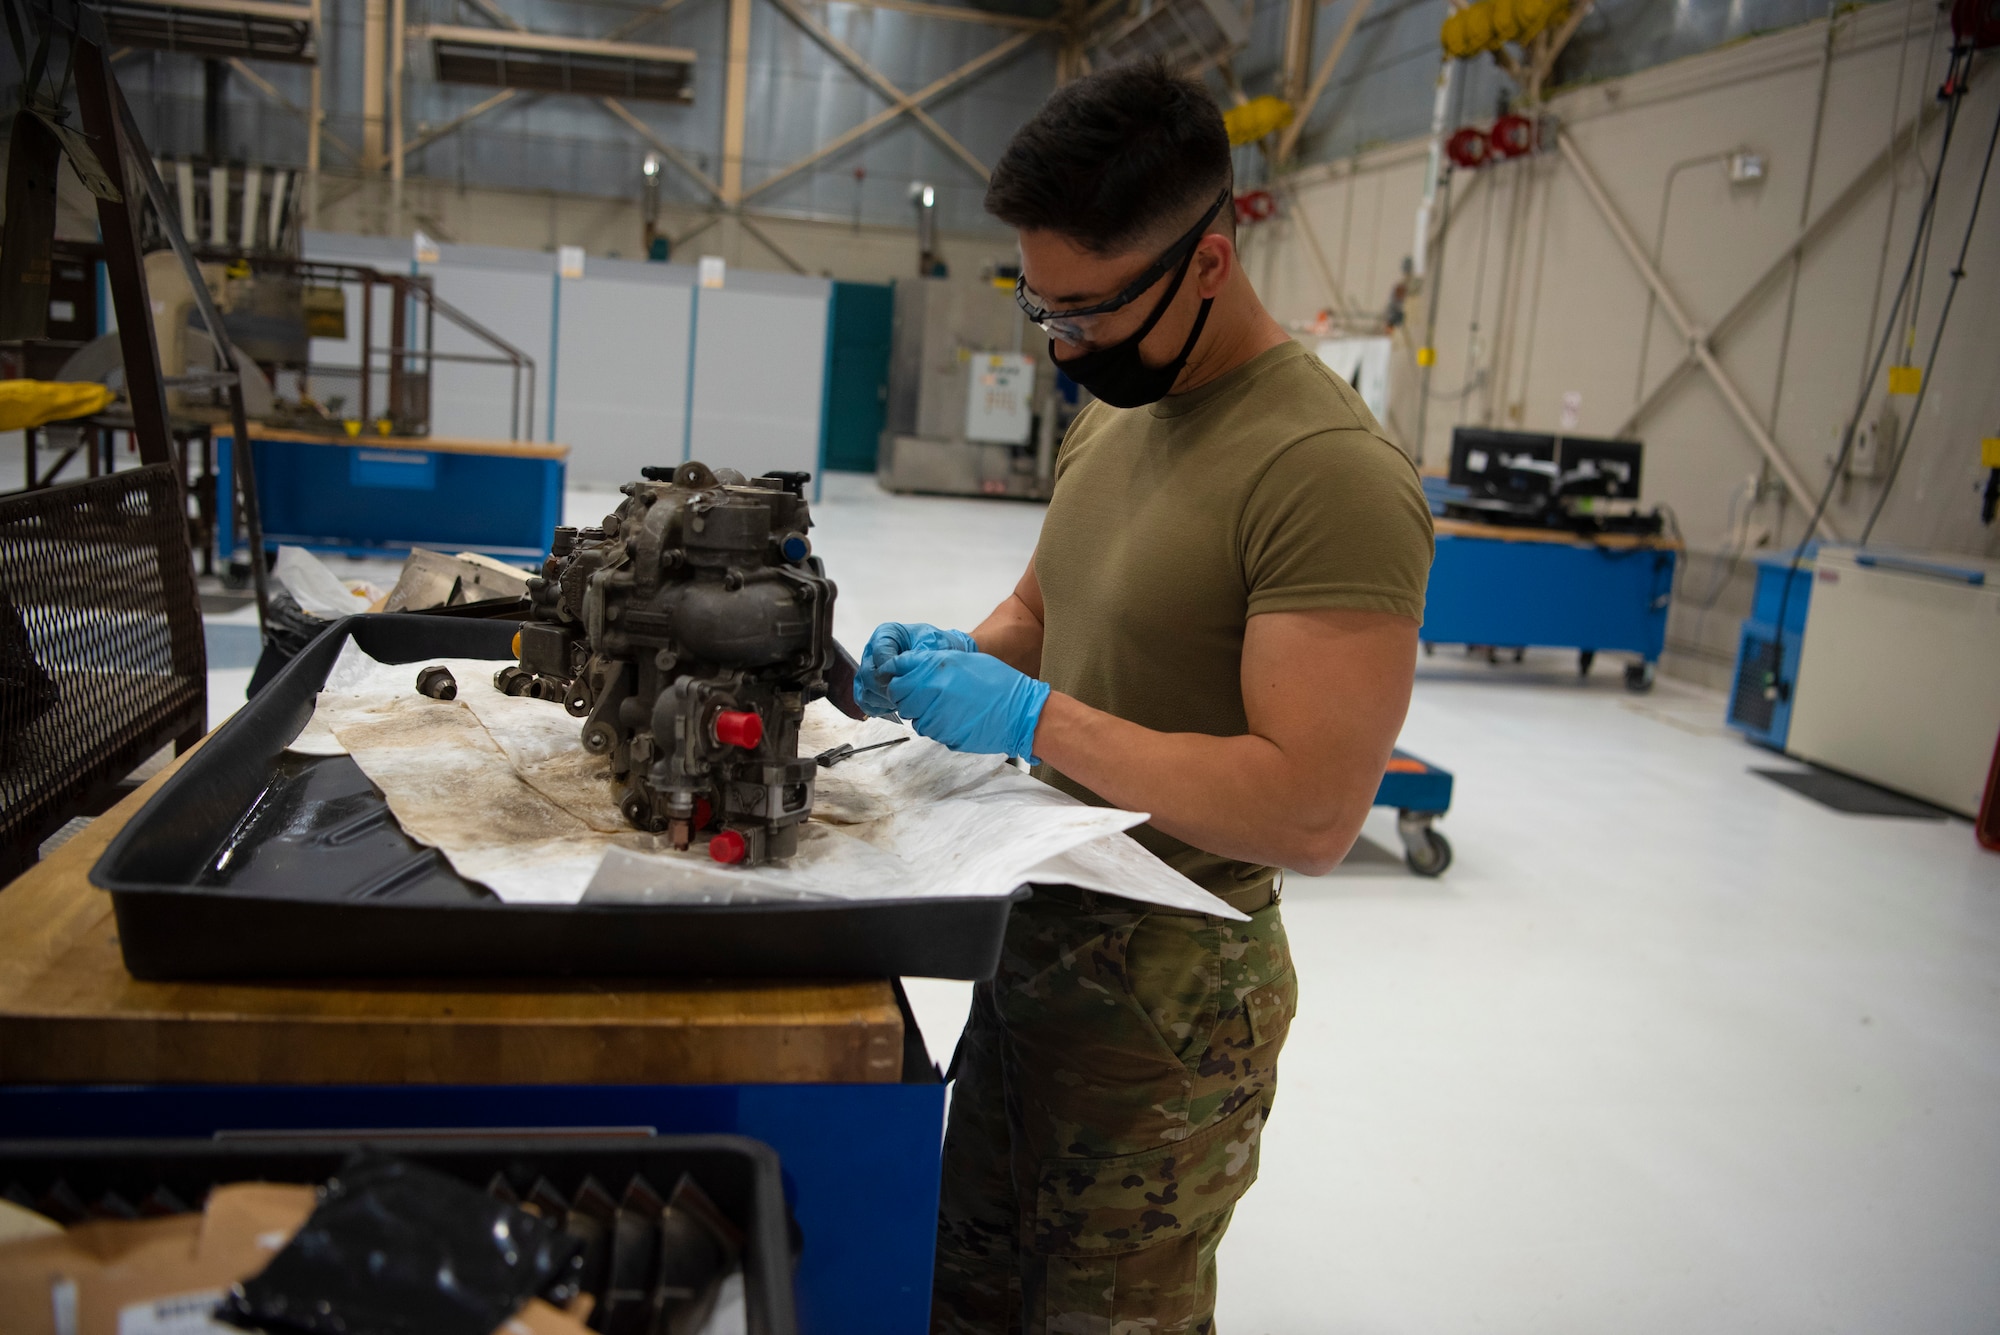 Senior Airman Noah Yoshimura, 49th Component Maintenance Squadron modular repair journeyman, cleans engine parts, May 13, 2021, on Holloman Air Force Base, New Mexico. The shop uses serviceable parts from different broken engines and pieces them together to make an engine operational. (U.S. Air Force photo by Airman 1st Class Jessica Sanchez)